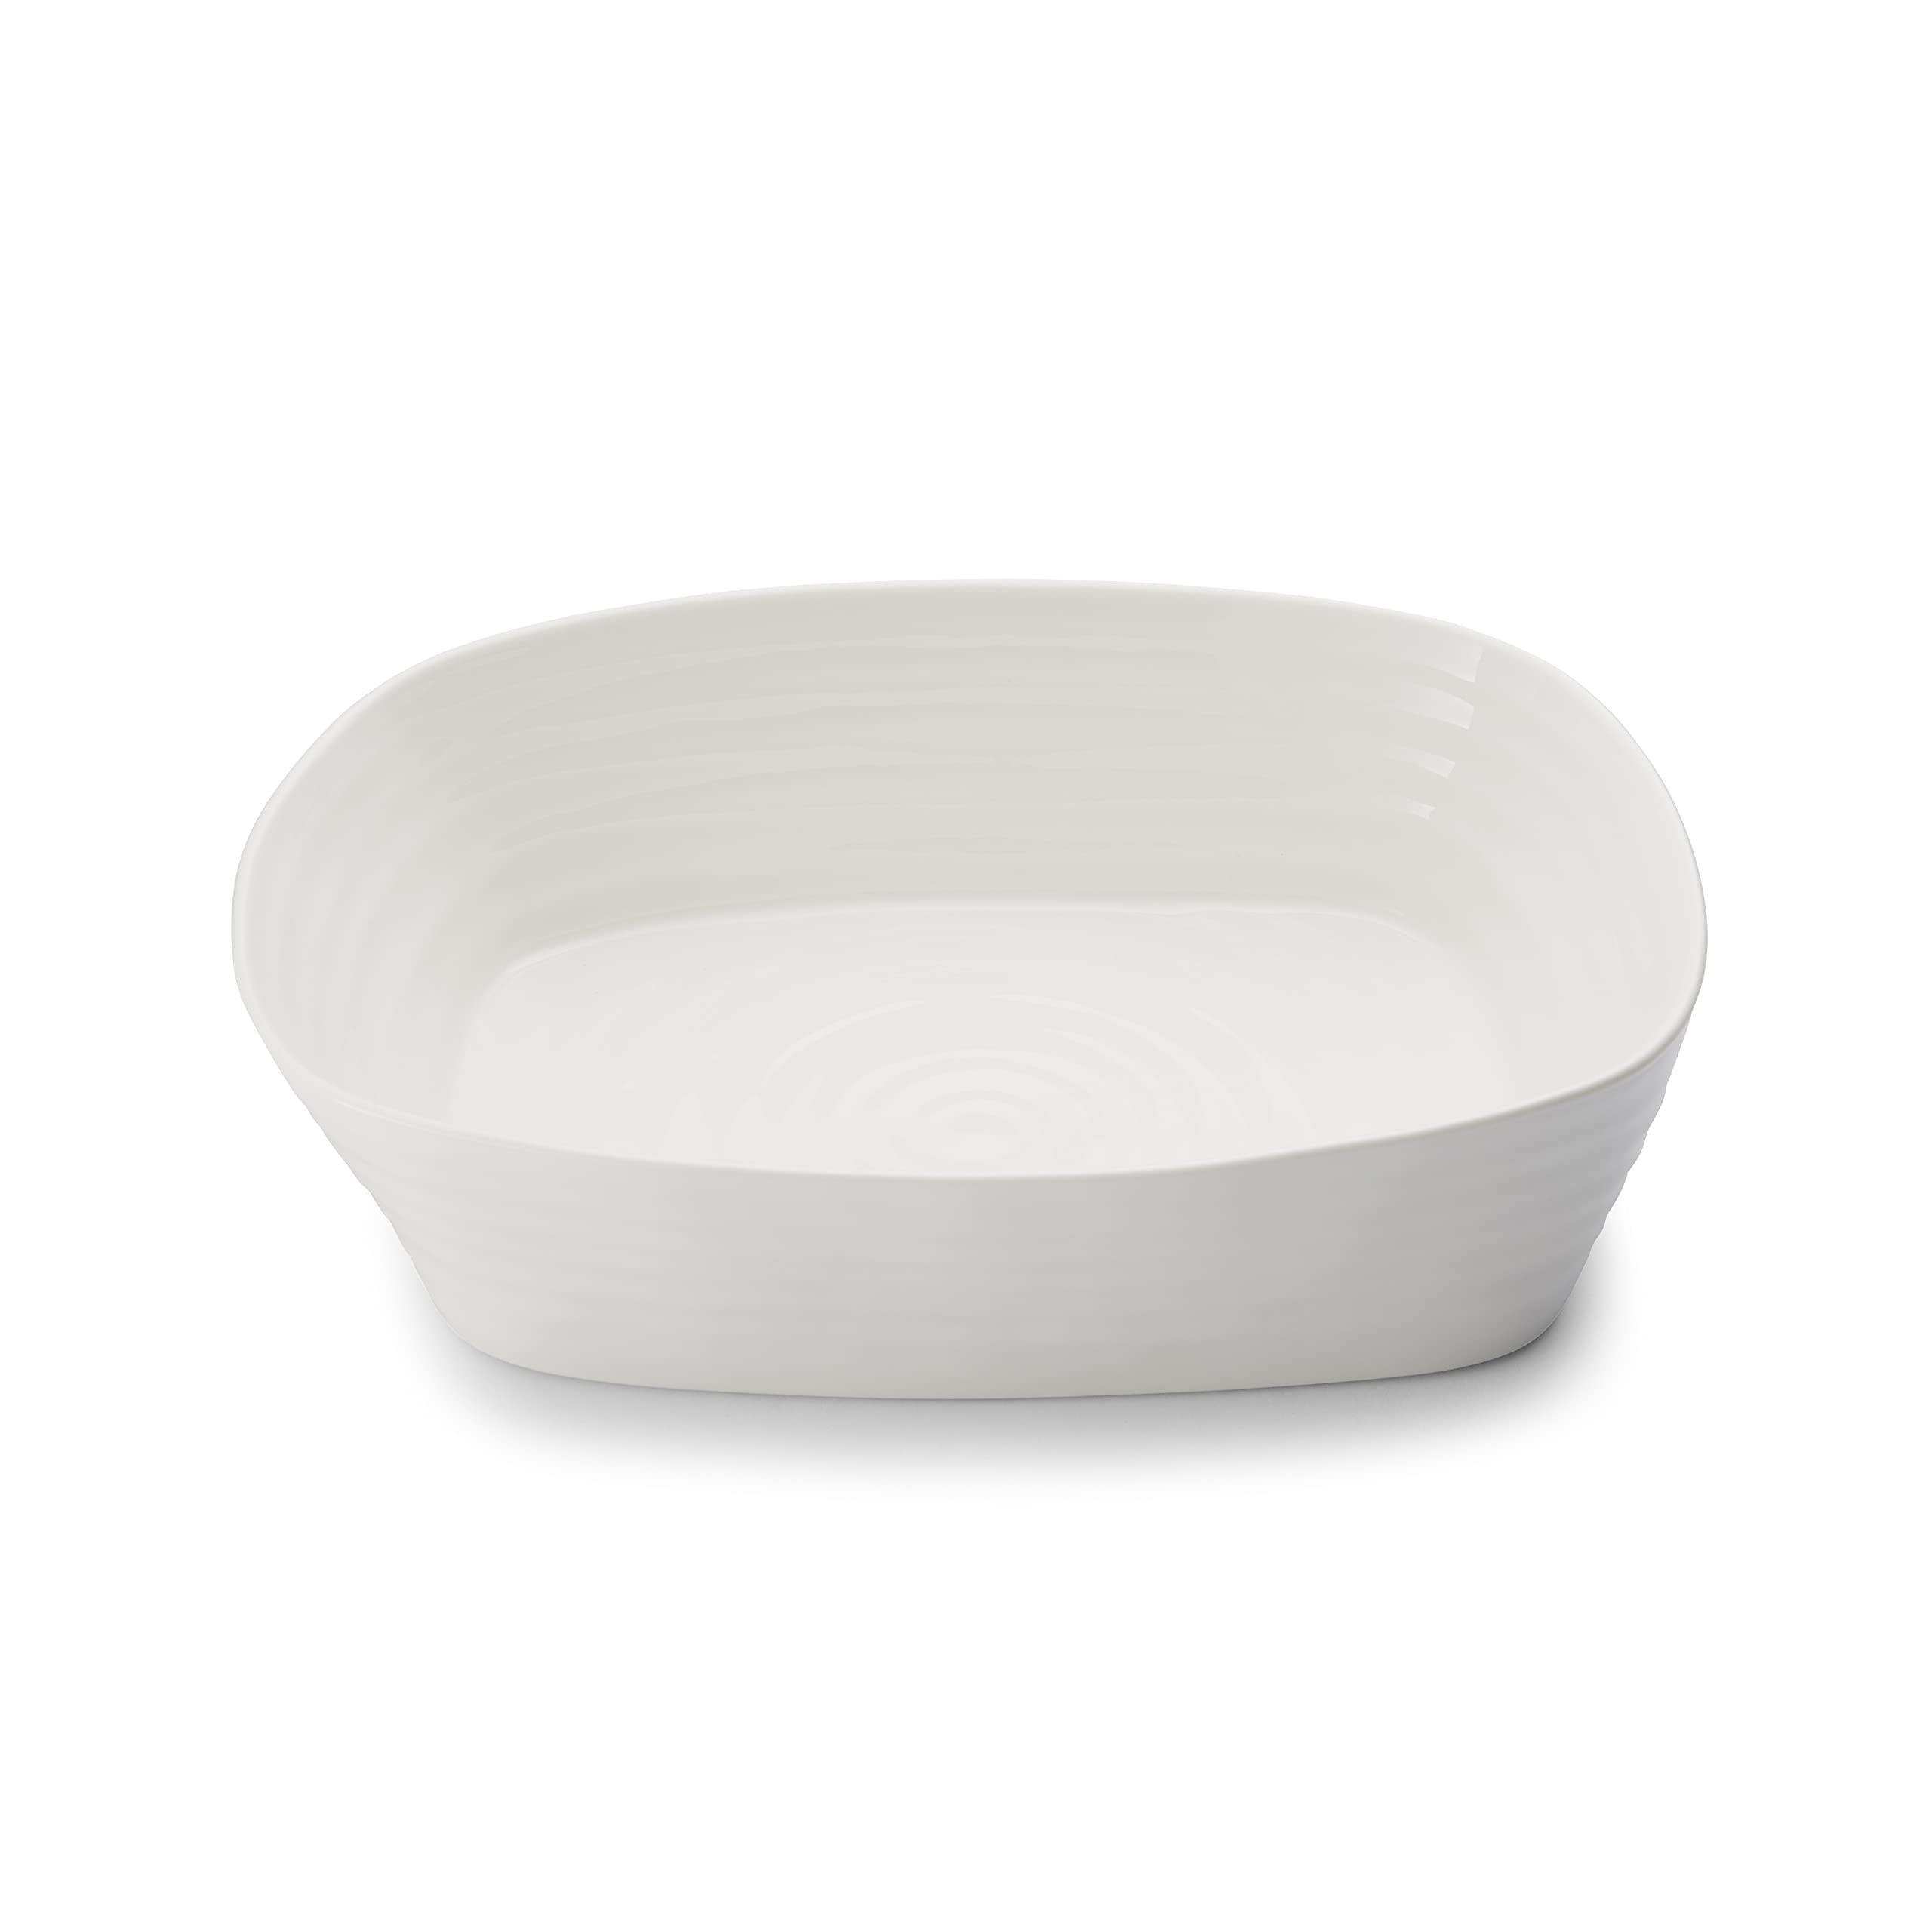 Portmeirion Sophie Conran White Lasagna Pan/Roaster | Rectangular Casserole Dish for Oven | 11.5 x 9.5 Inch | Made from Fine Porcelain | Dishwasher and Microwave Safe